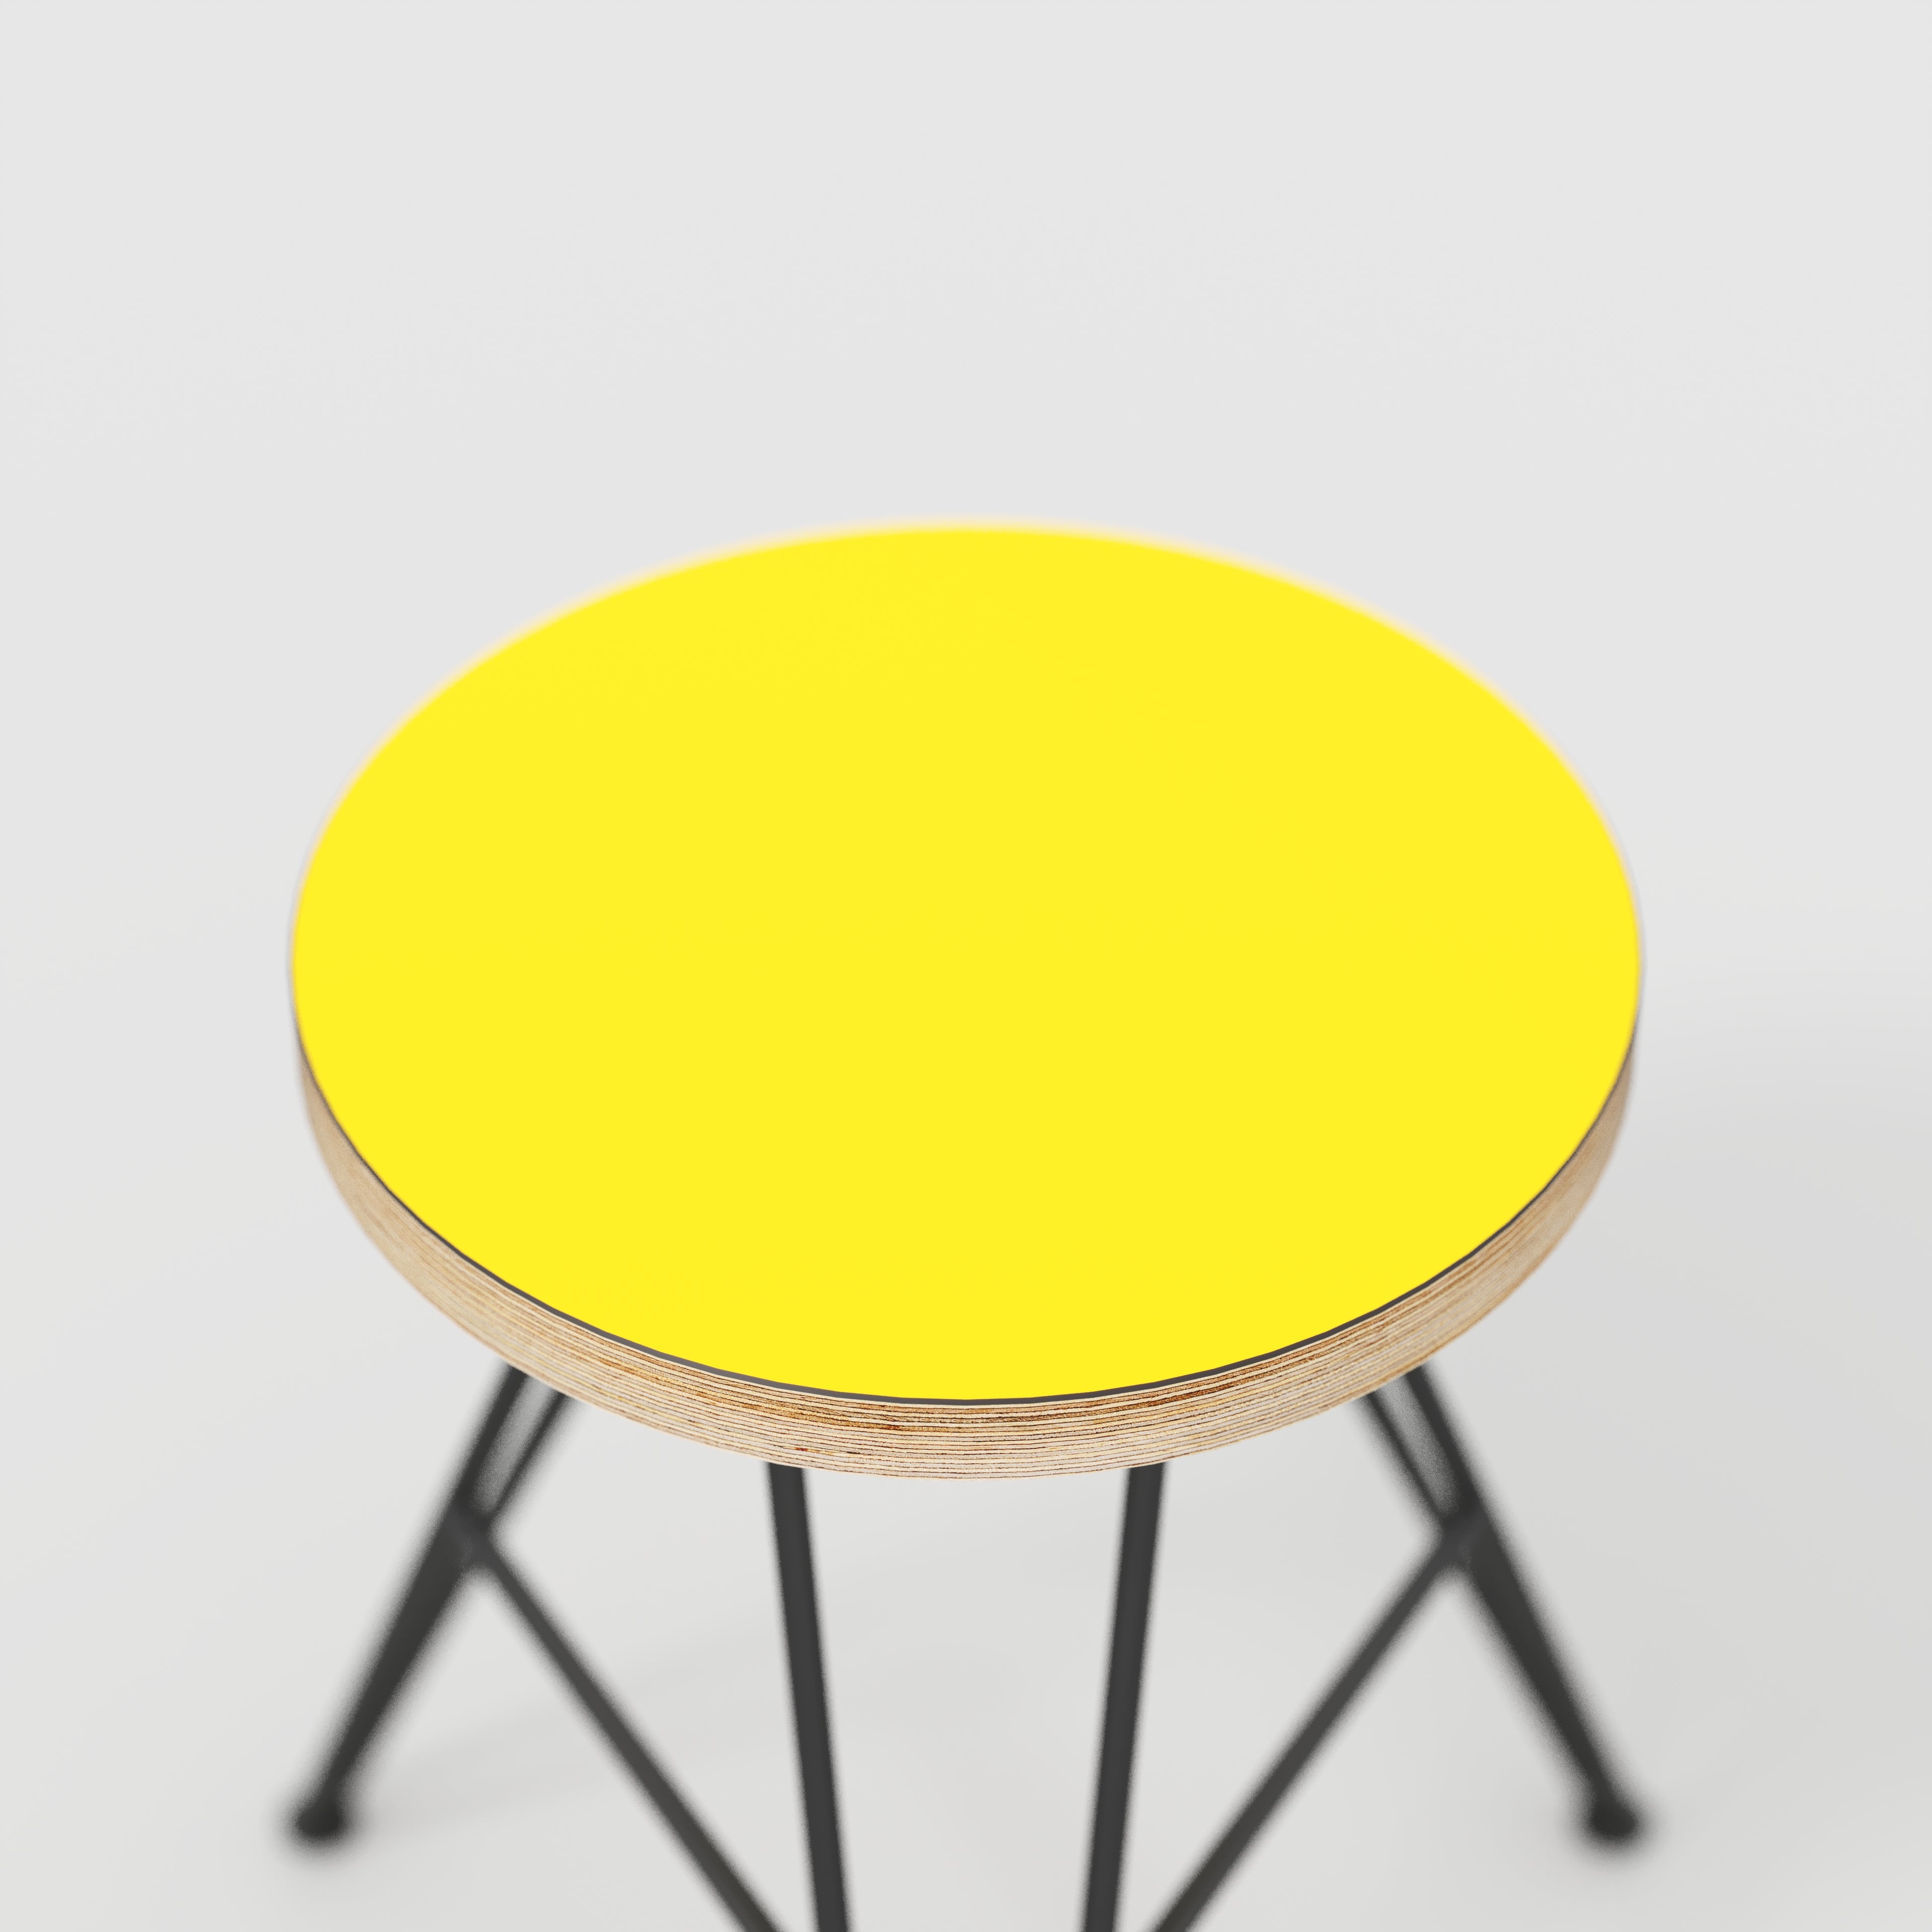 Stool with Black Hairpin Base - Formica Chrome Yellow